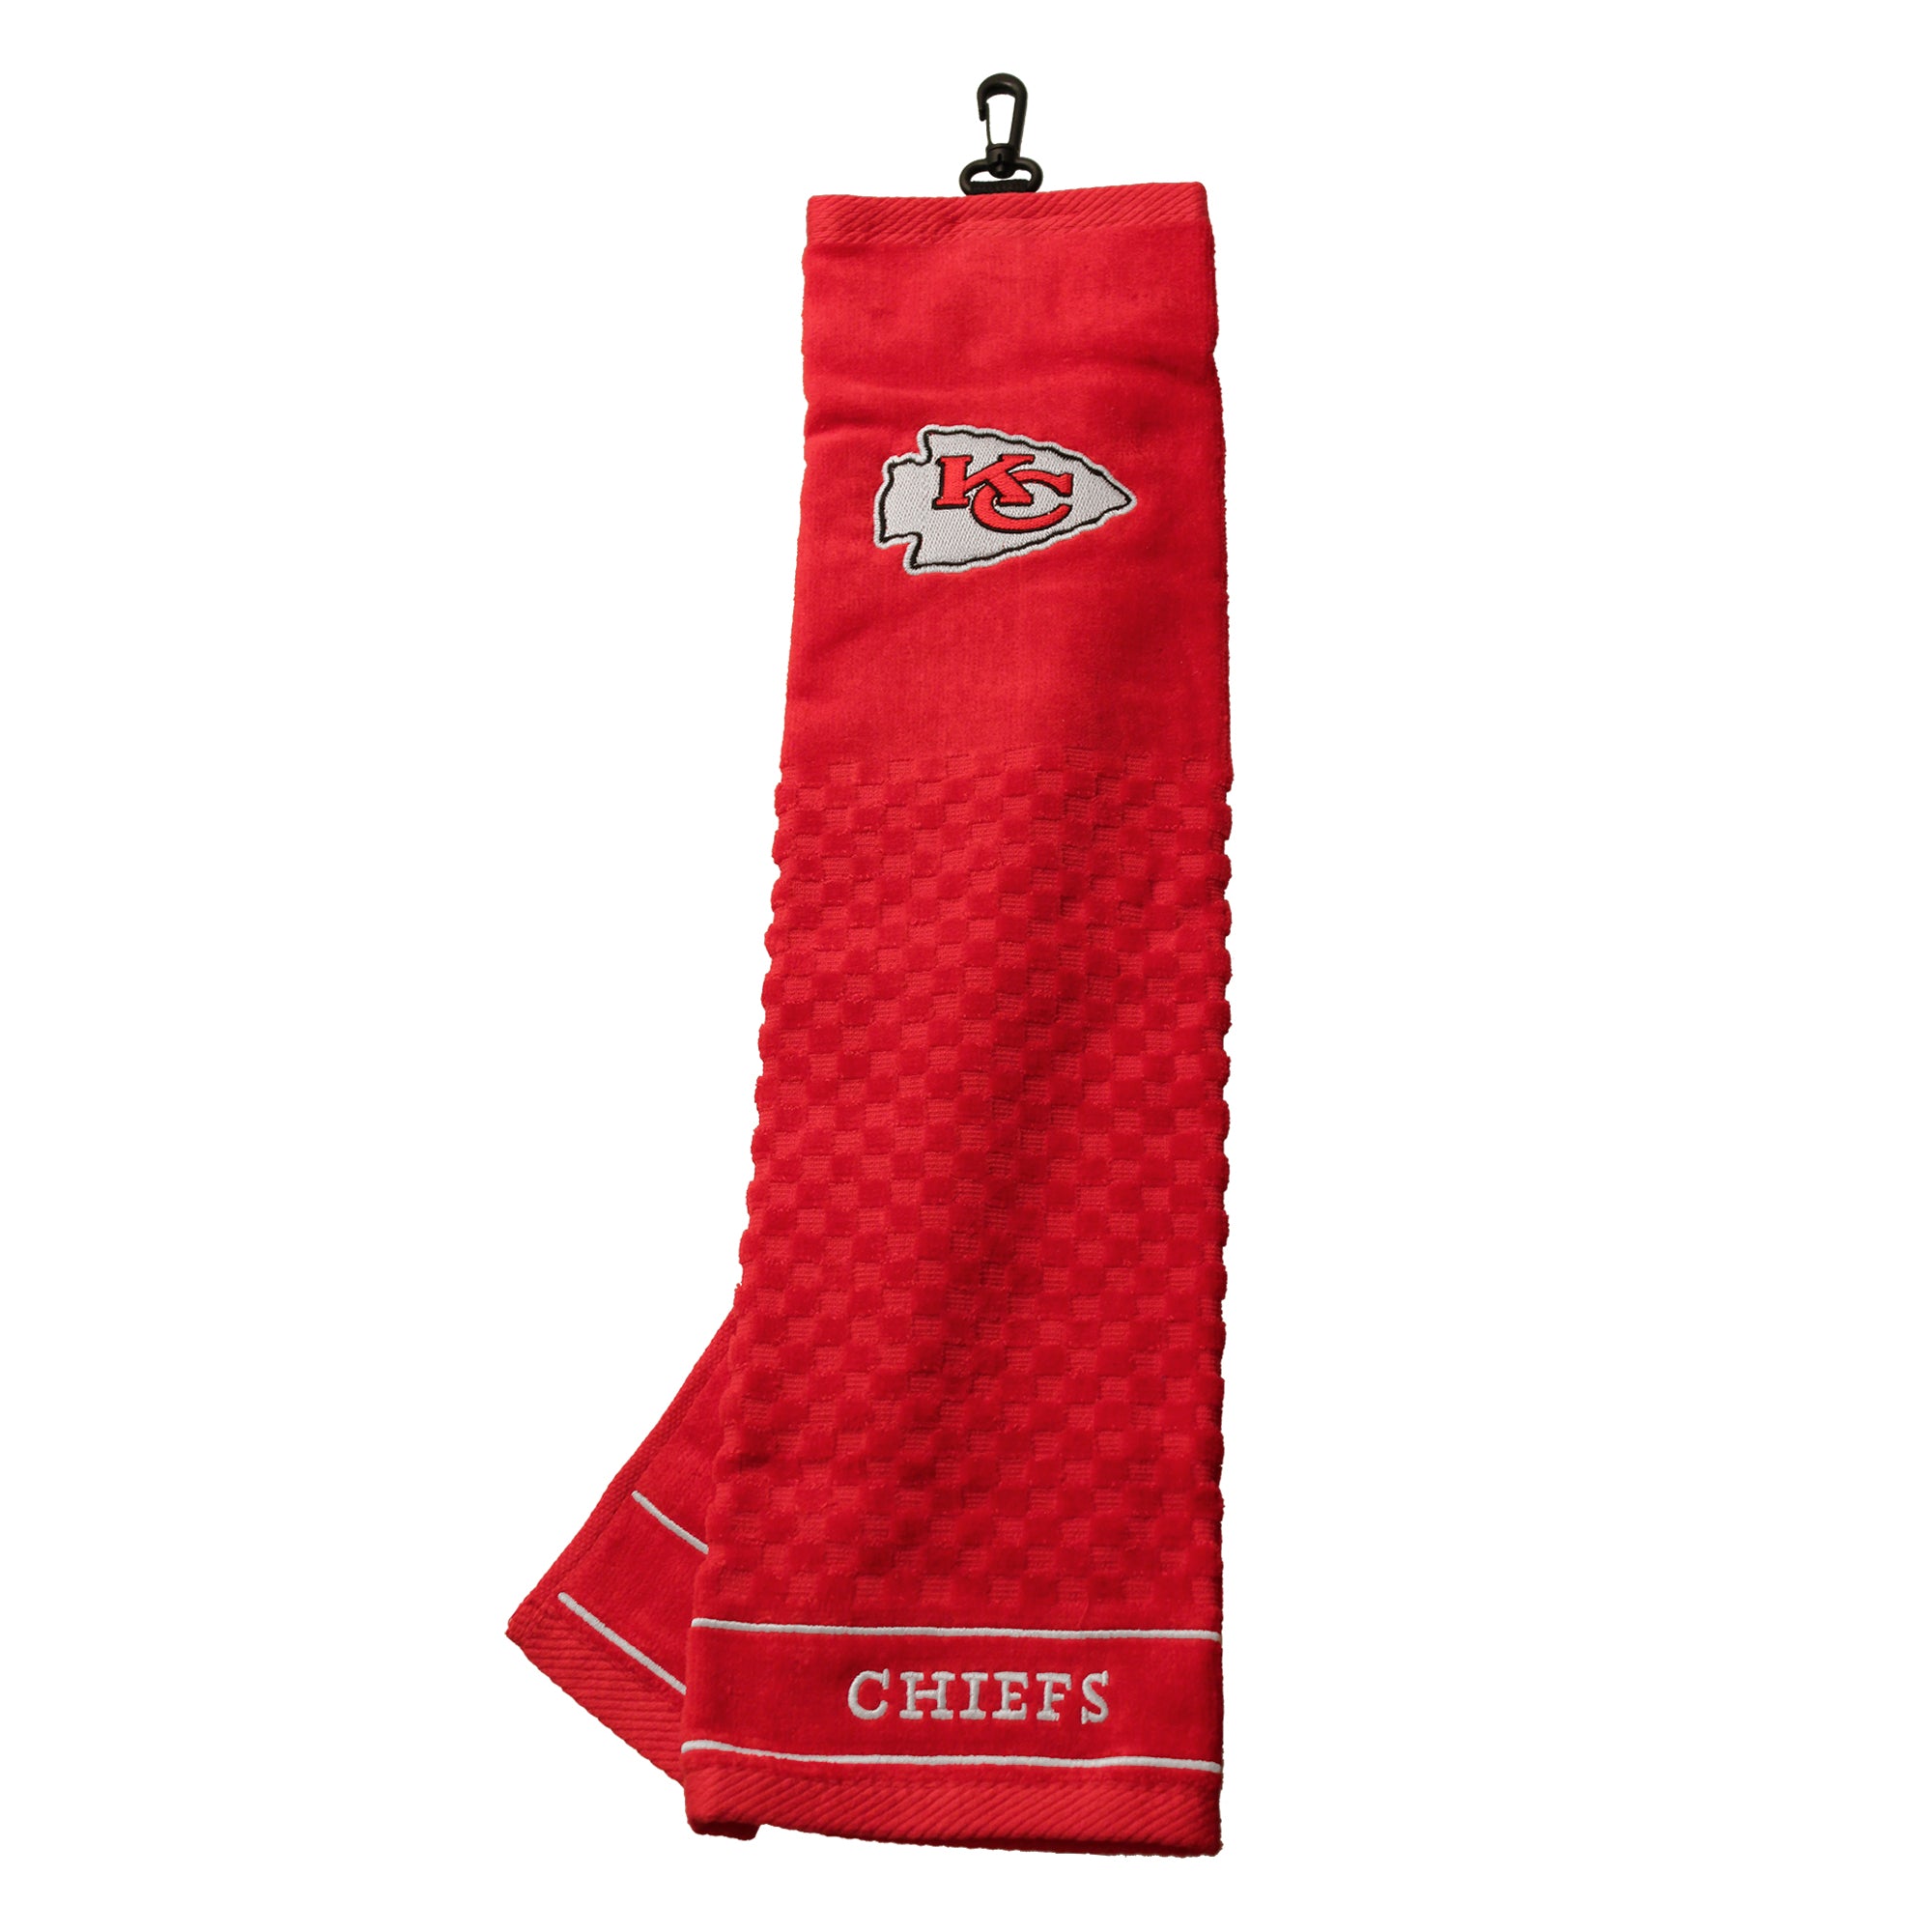 Kansas City Chiefs Embroidered Towel